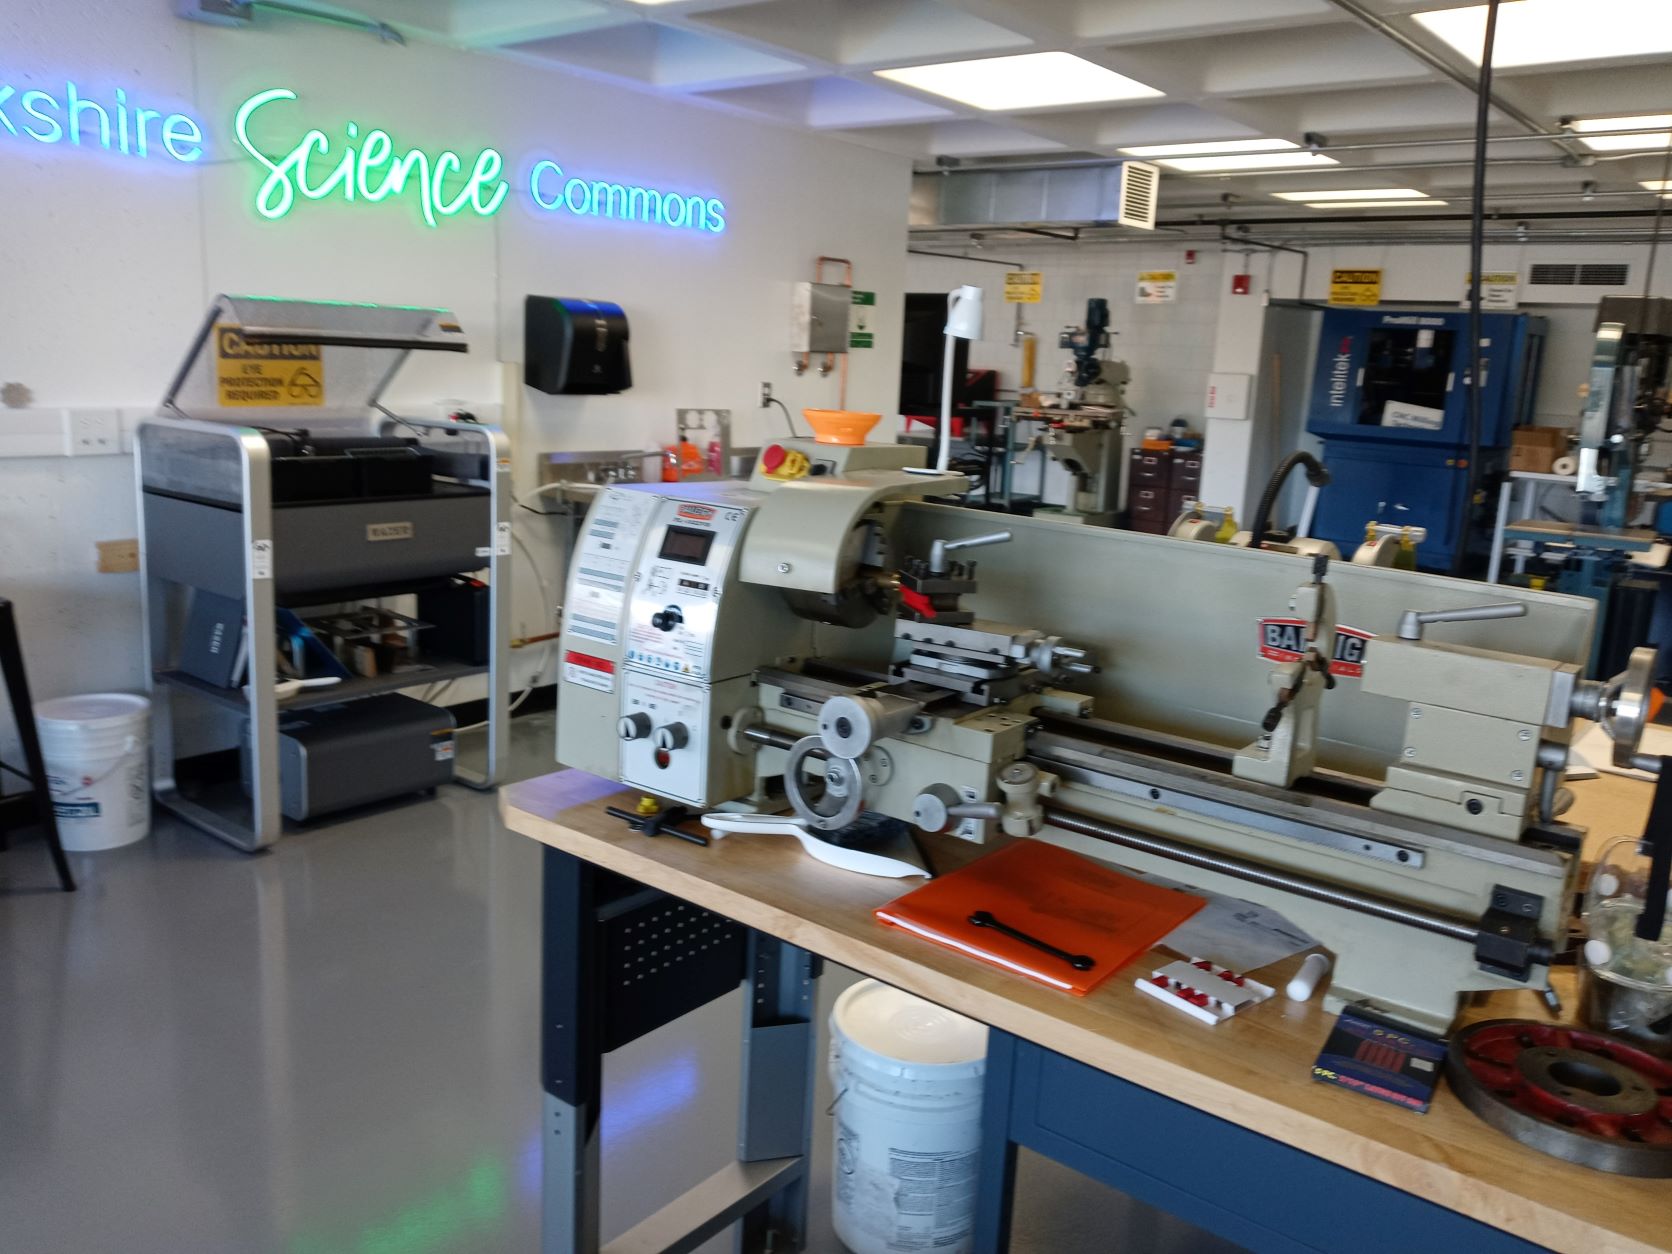 Berkshire Science Commons with neon sign and several machines.